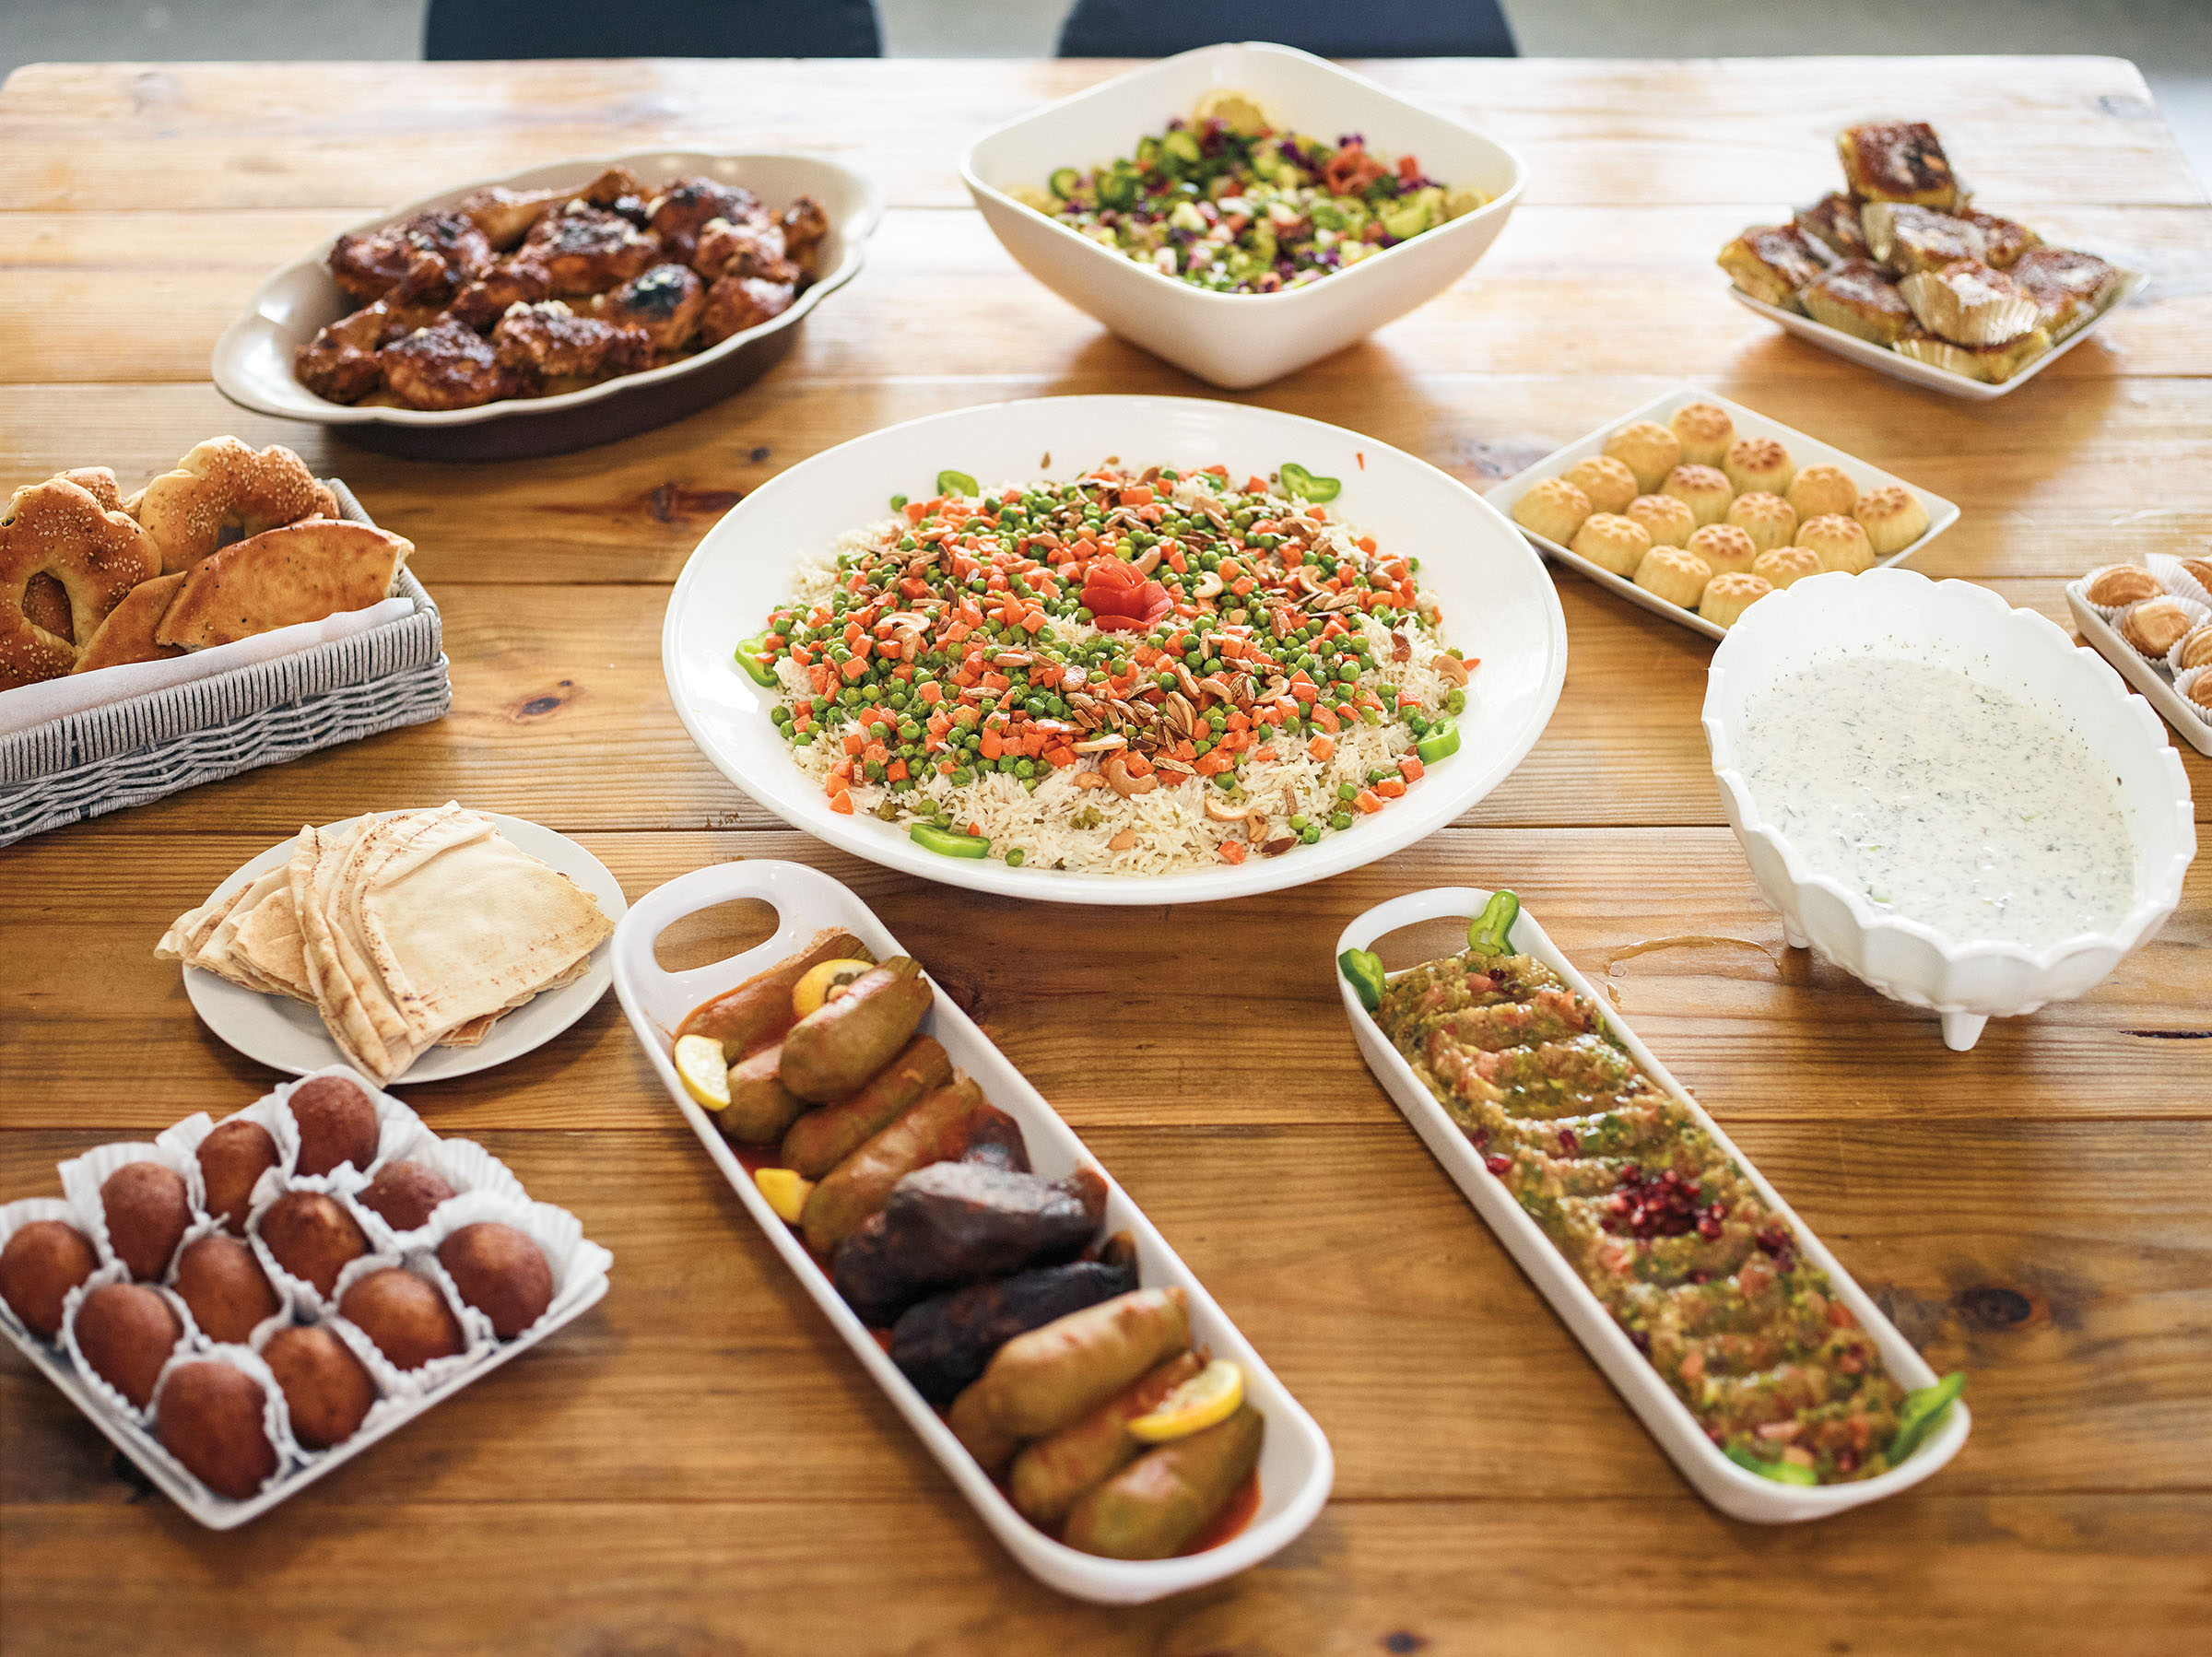 A collection of traditional Syrian dishes on platters on a wooden table